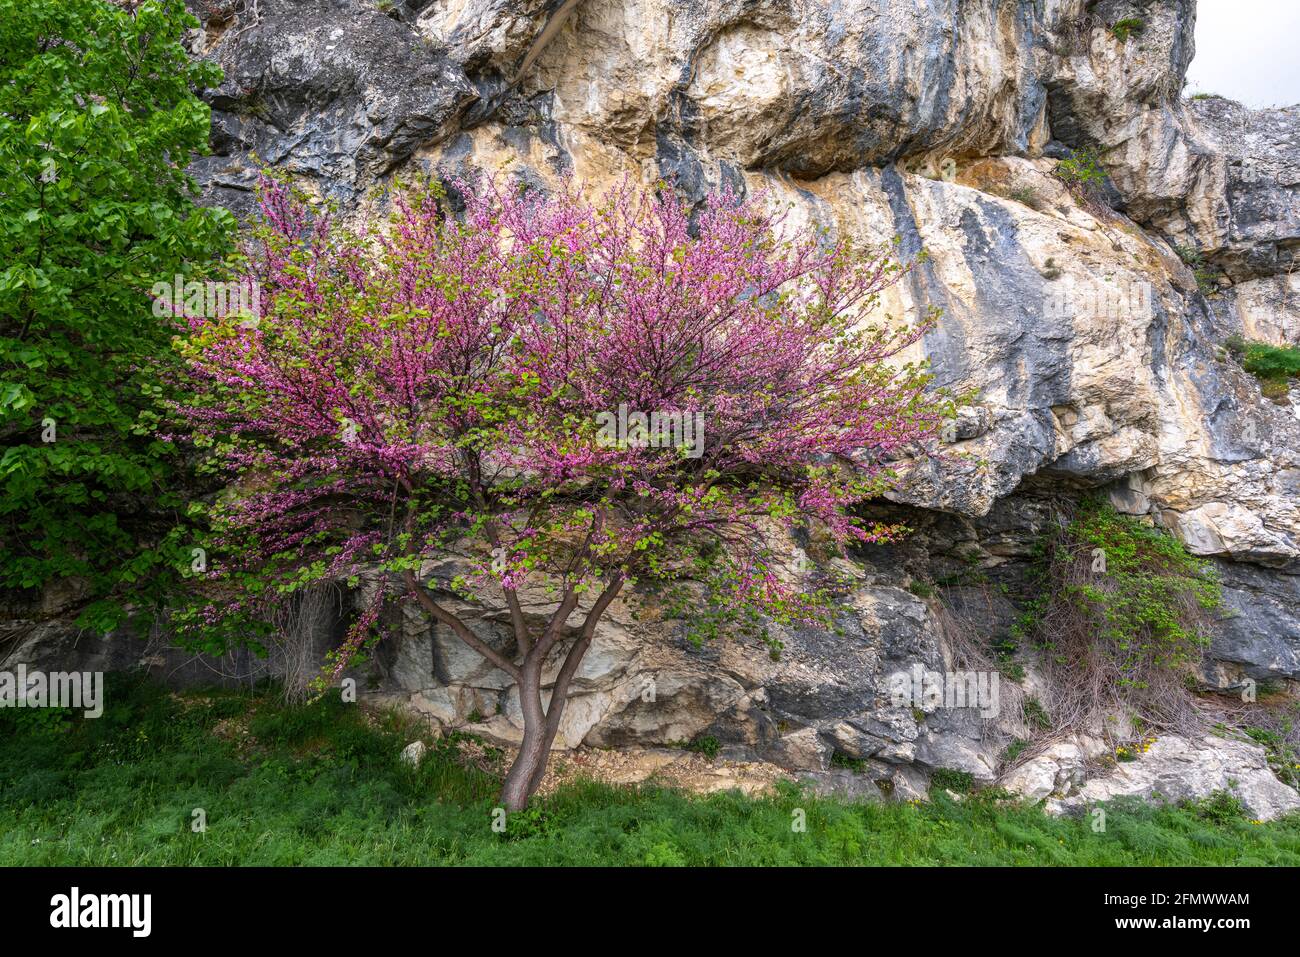 A Judas tree, Cercis siliquastrum, flourished at the foot of a rock wall. Abruzzo, Italy, europe Stock Photo